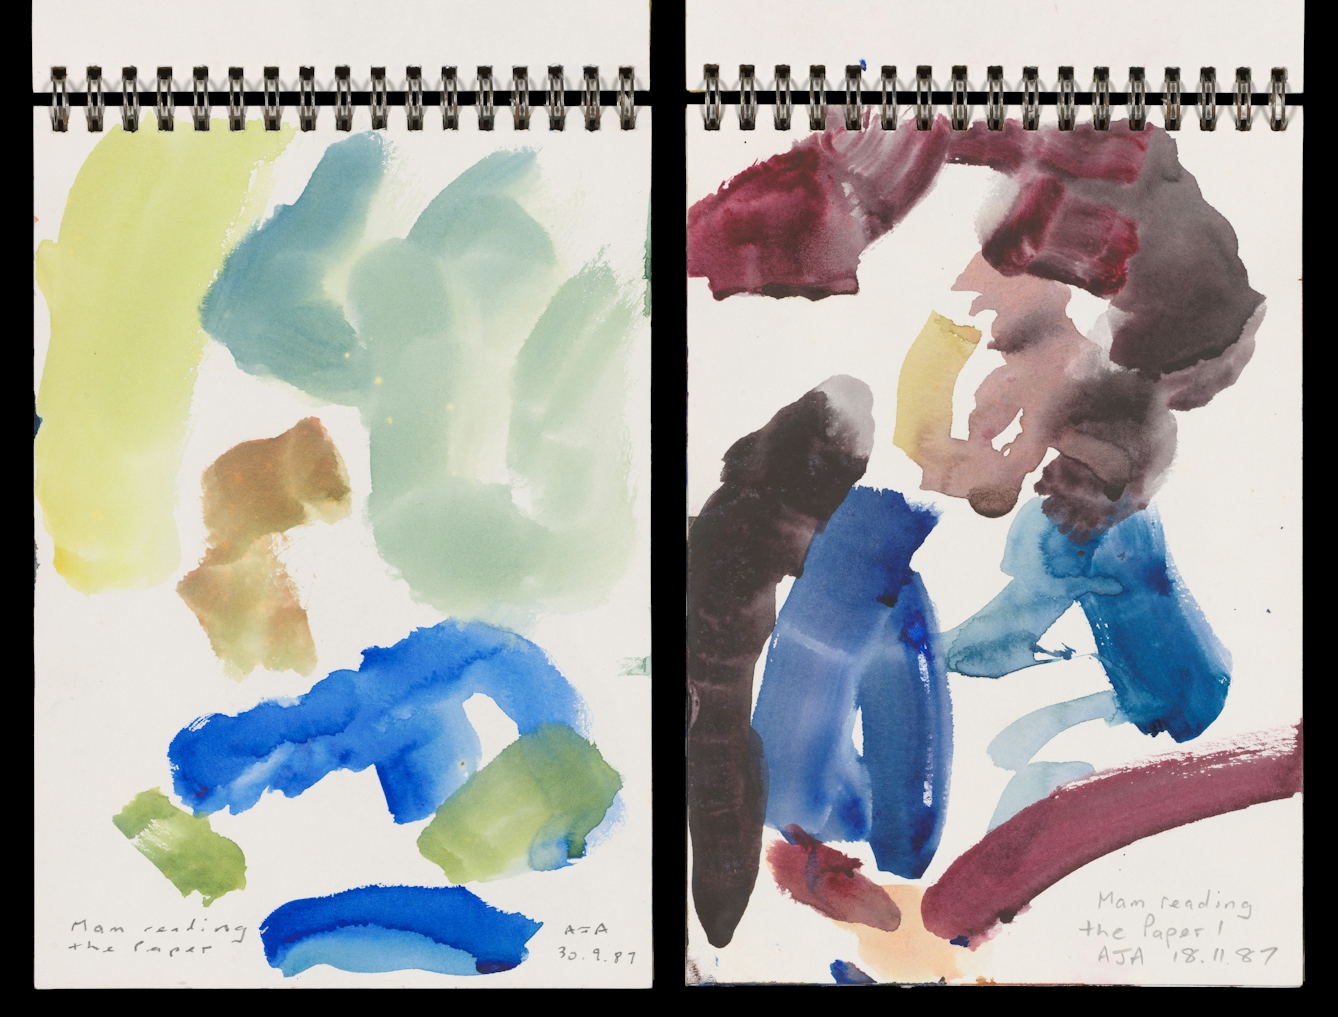 Photograph of an open page from two small sketchbooks. Both pages show an abstract painting made with a brush and paint in thick lines. The colours include yellow, blues and maroons. Both paints are hand titled, "Mam reading the paper". The one on the left is dated 30.9.87 and the one on the right is dated, 18.11.87.